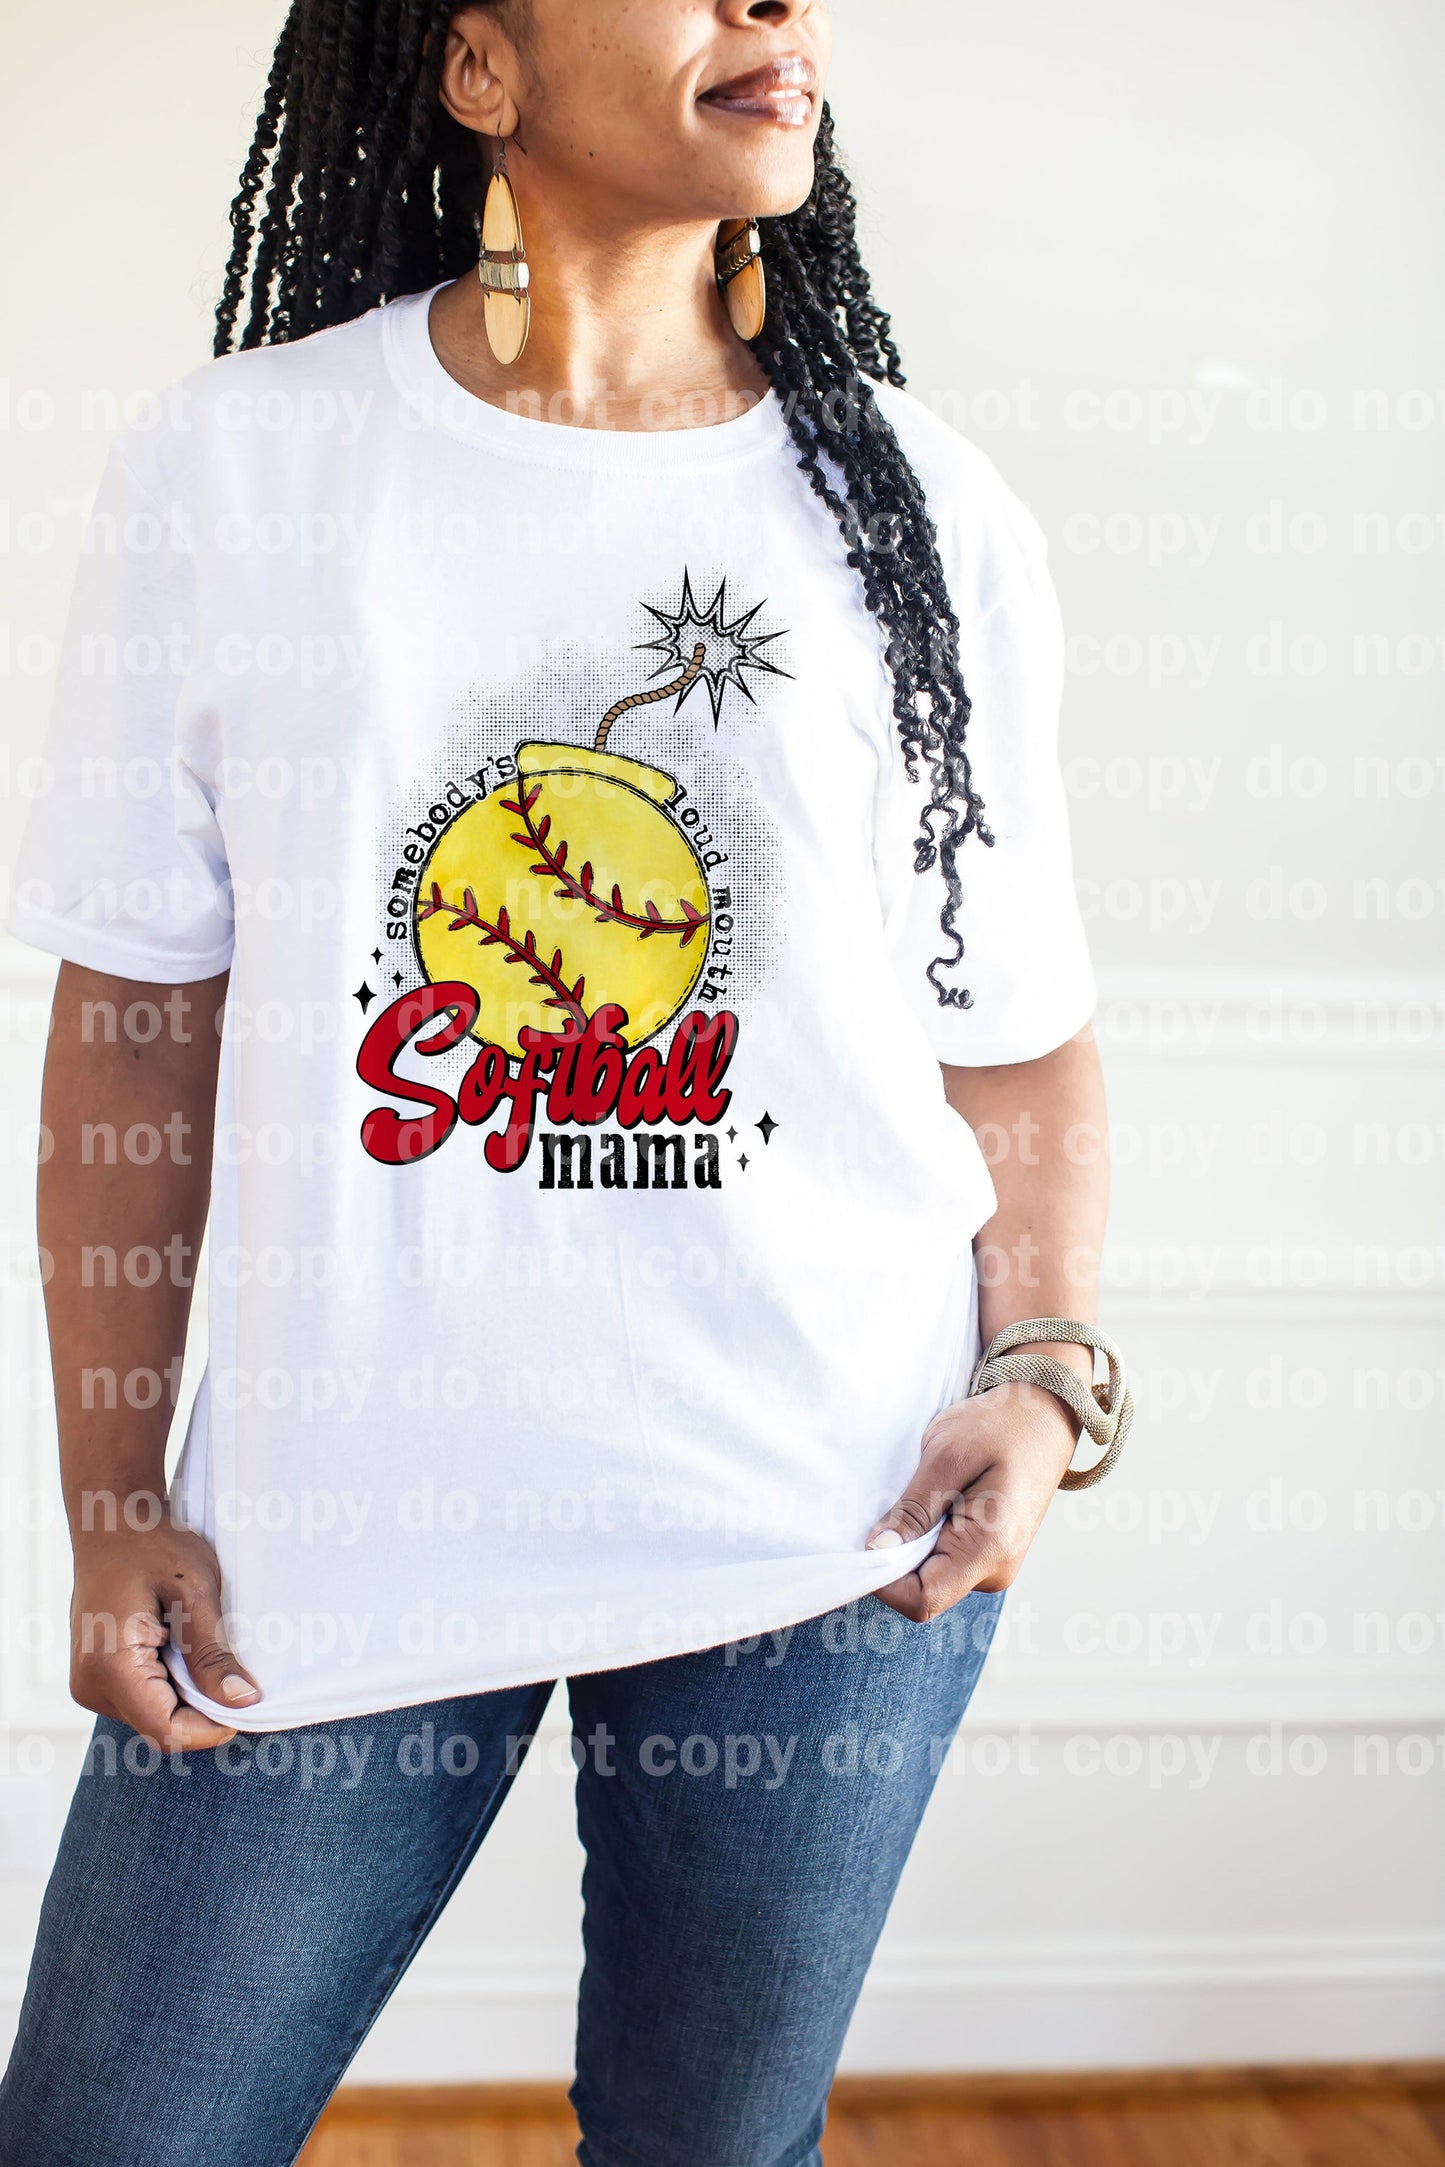 Somebody's Loud Mouth Softball Mama Dream Print or Sublimation Print